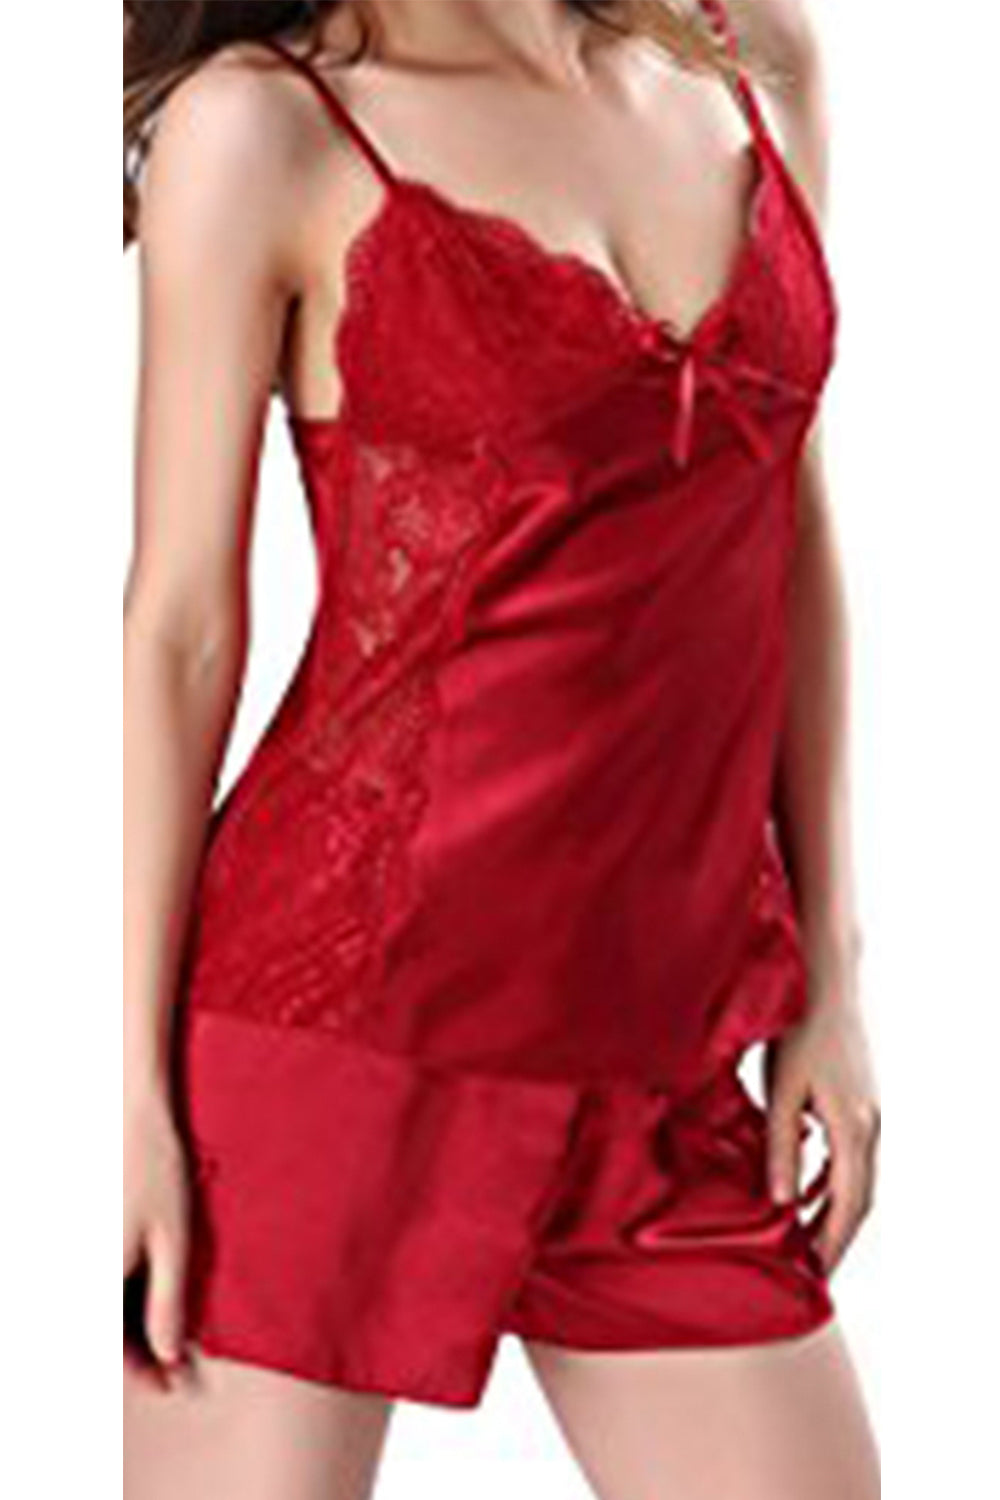 Ketty More Silk Mini Short And A Top Lingerie Set Is Beautiful And Pretty To Wear-KMWL911